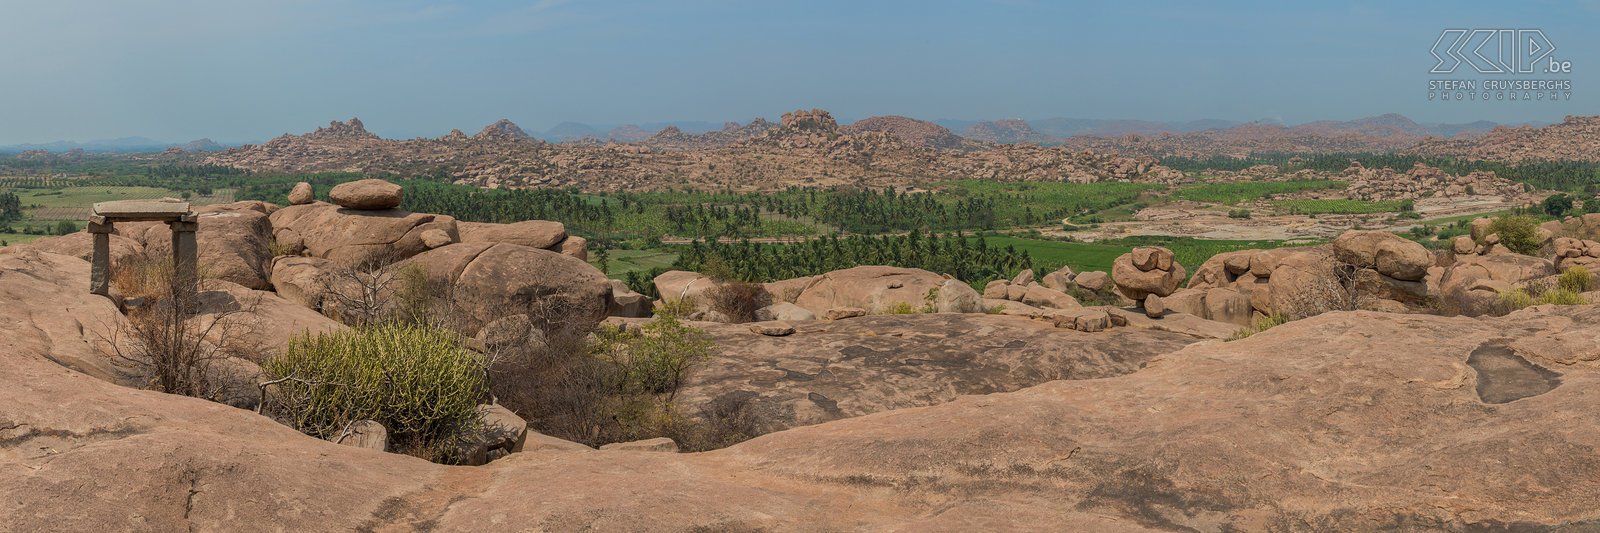 Hampi - Malyavanta hill On the top of Malyavanta hill you have a splendid scenery of Hampi with hills and impressive boulders and green valleys with palm trees. Stefan Cruysberghs